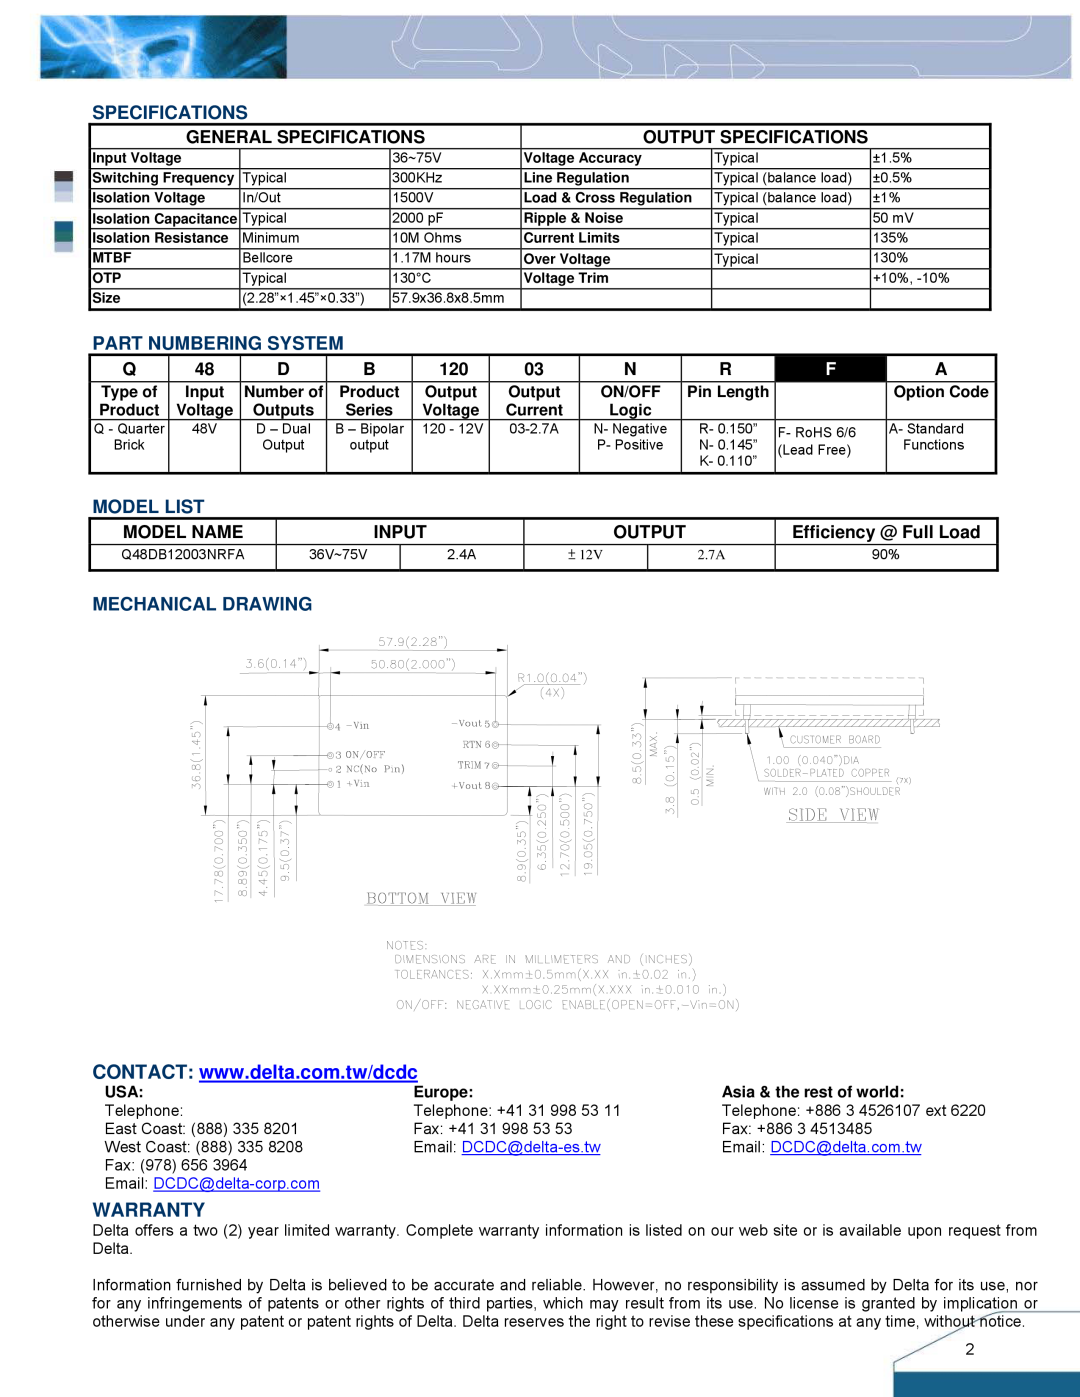 Delta Electronics Q48DB Warranty, Specifications, Part Numbering System, Model List, Mechanical Drawing, Model Name, Input 